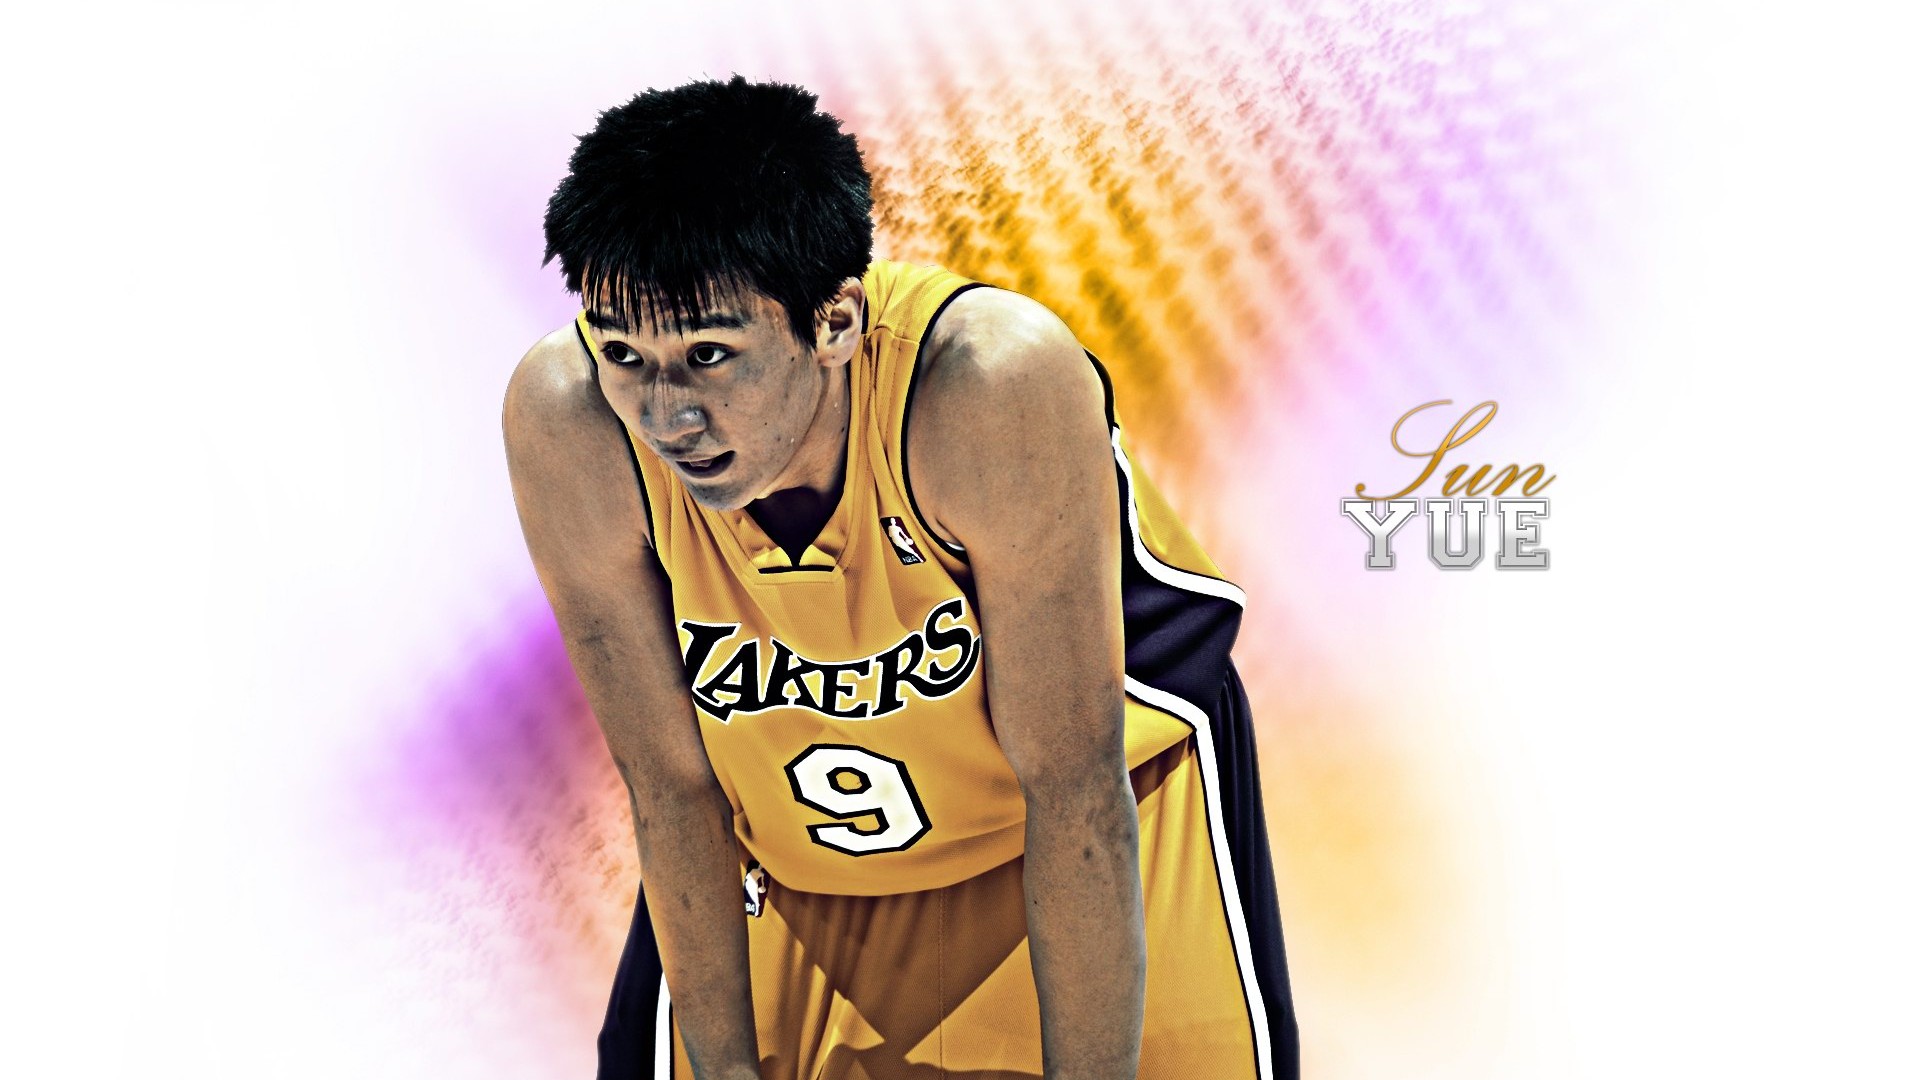 Los Angeles Lakers Wallpaper Oficial #25 - 1920x1080